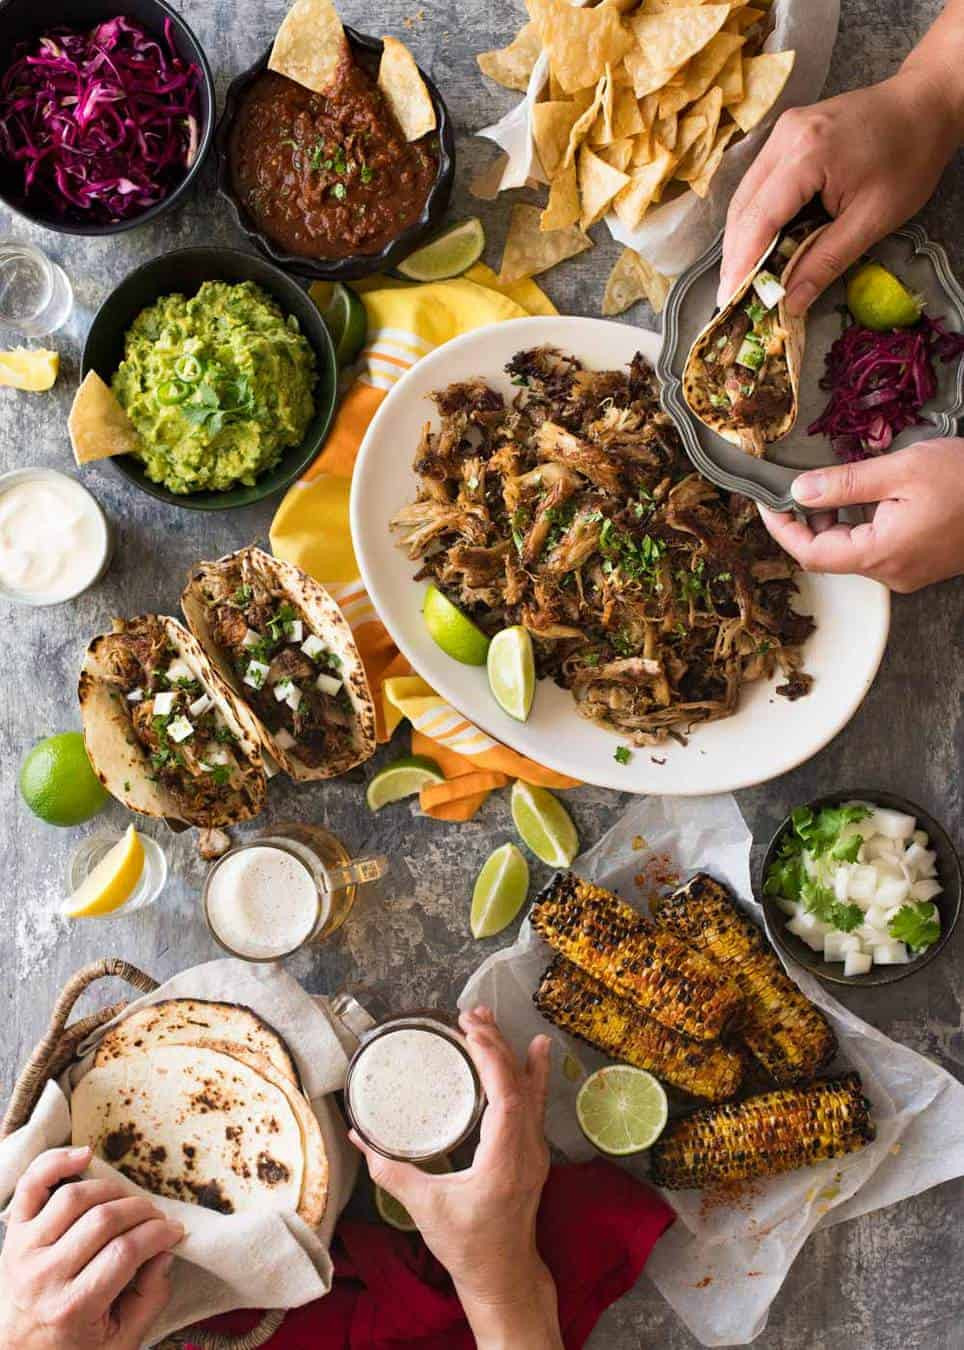 Easy Dinner Party Ideas For 8
 A Big Mexican Fiesta That s Easy to Make